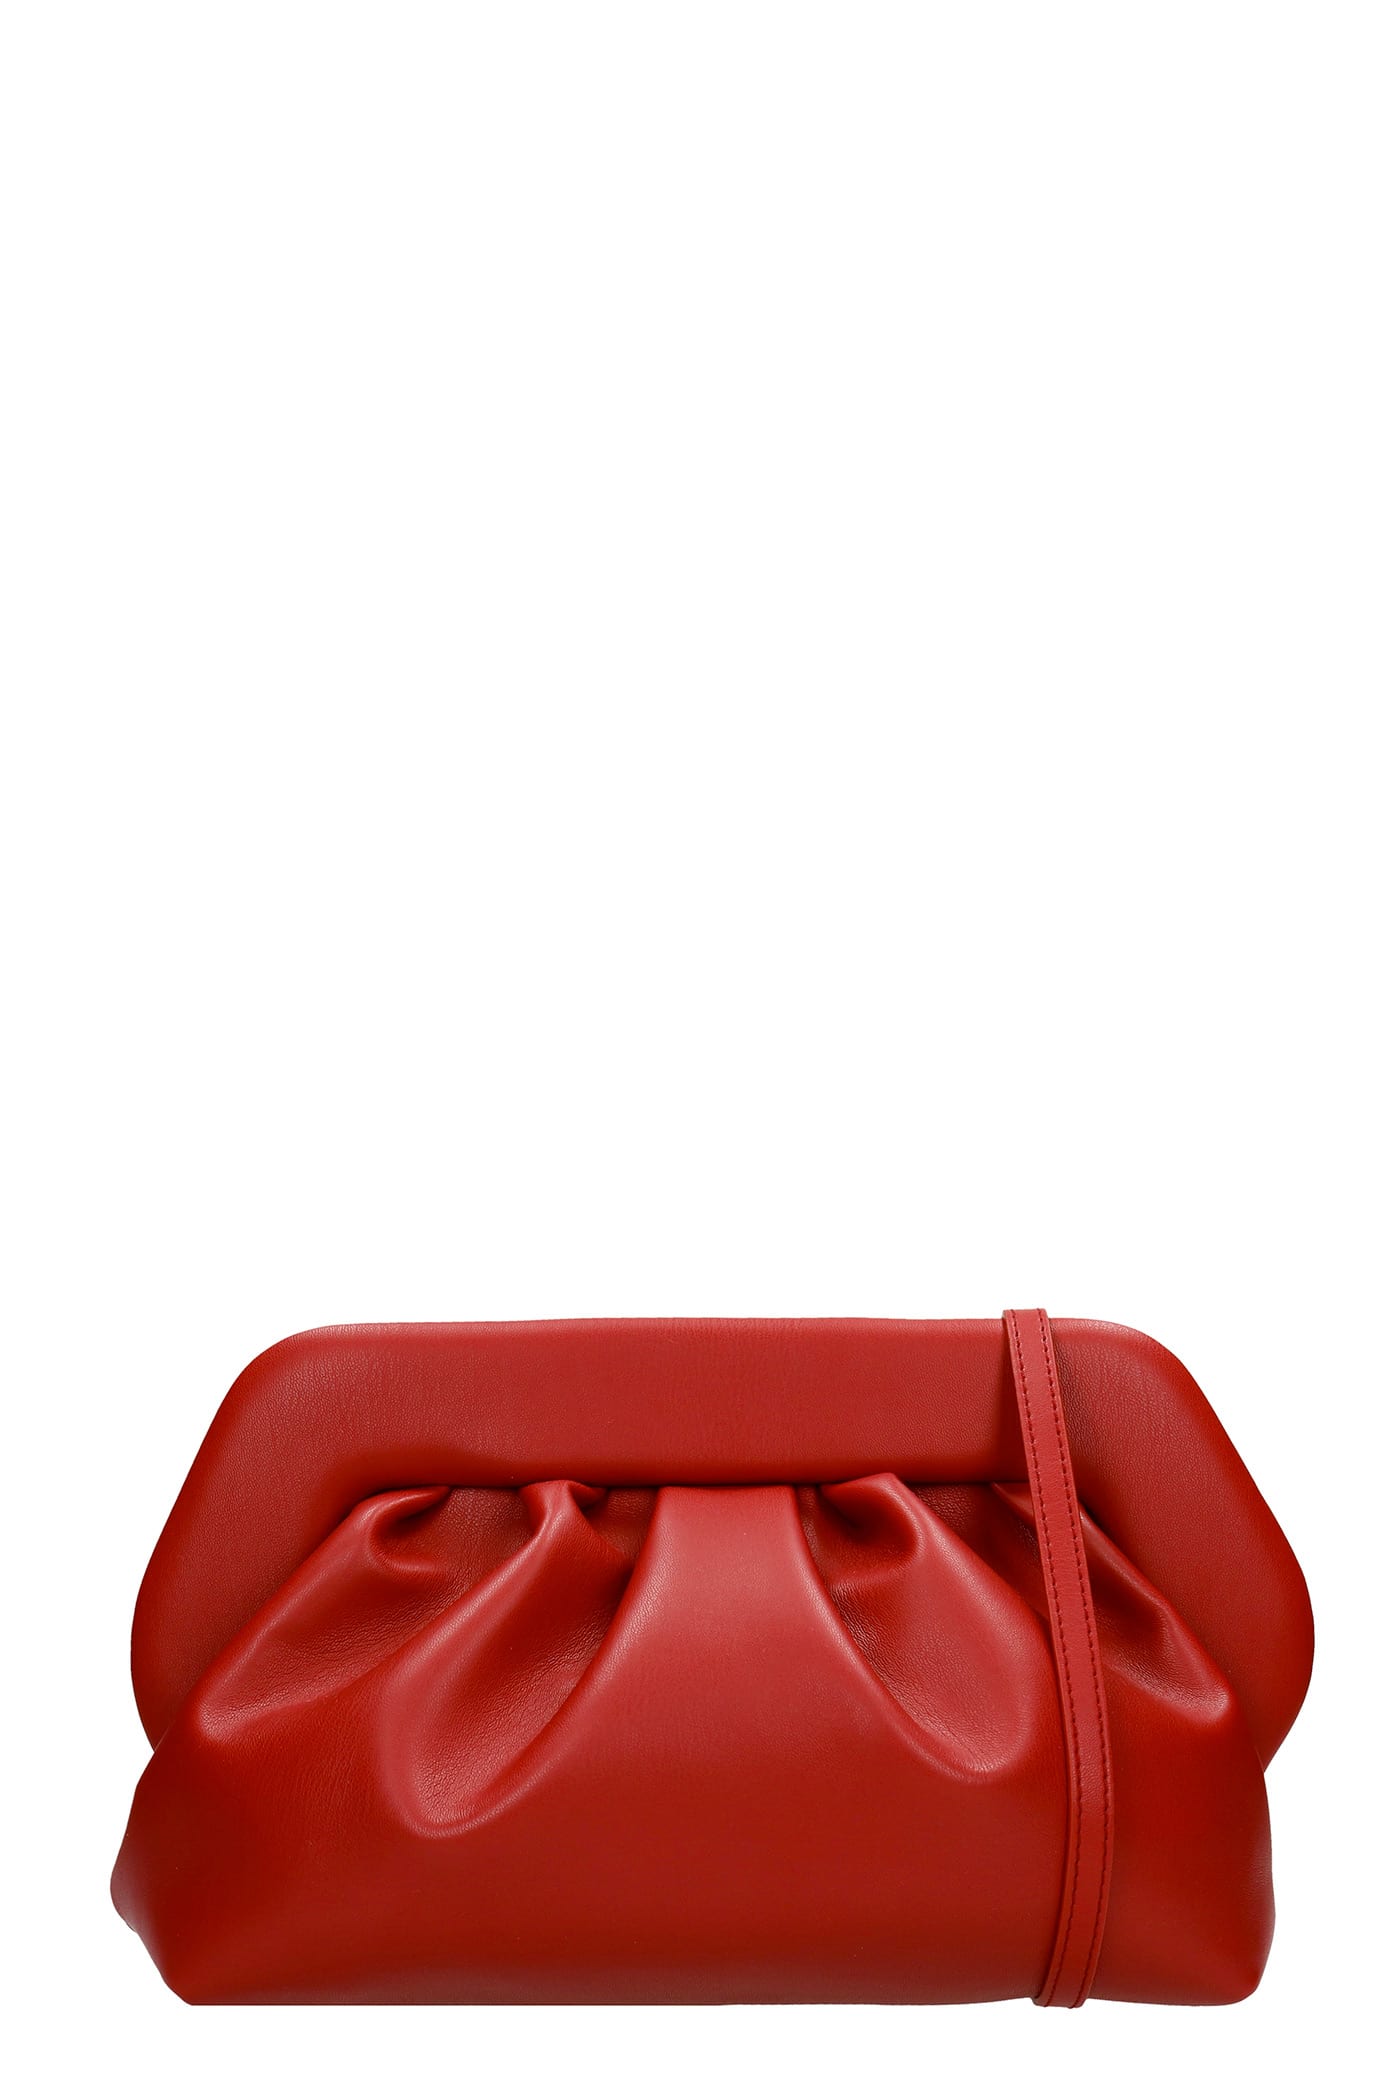 THEMOIRè Bios Basic Shoulder Bag In Red Leather